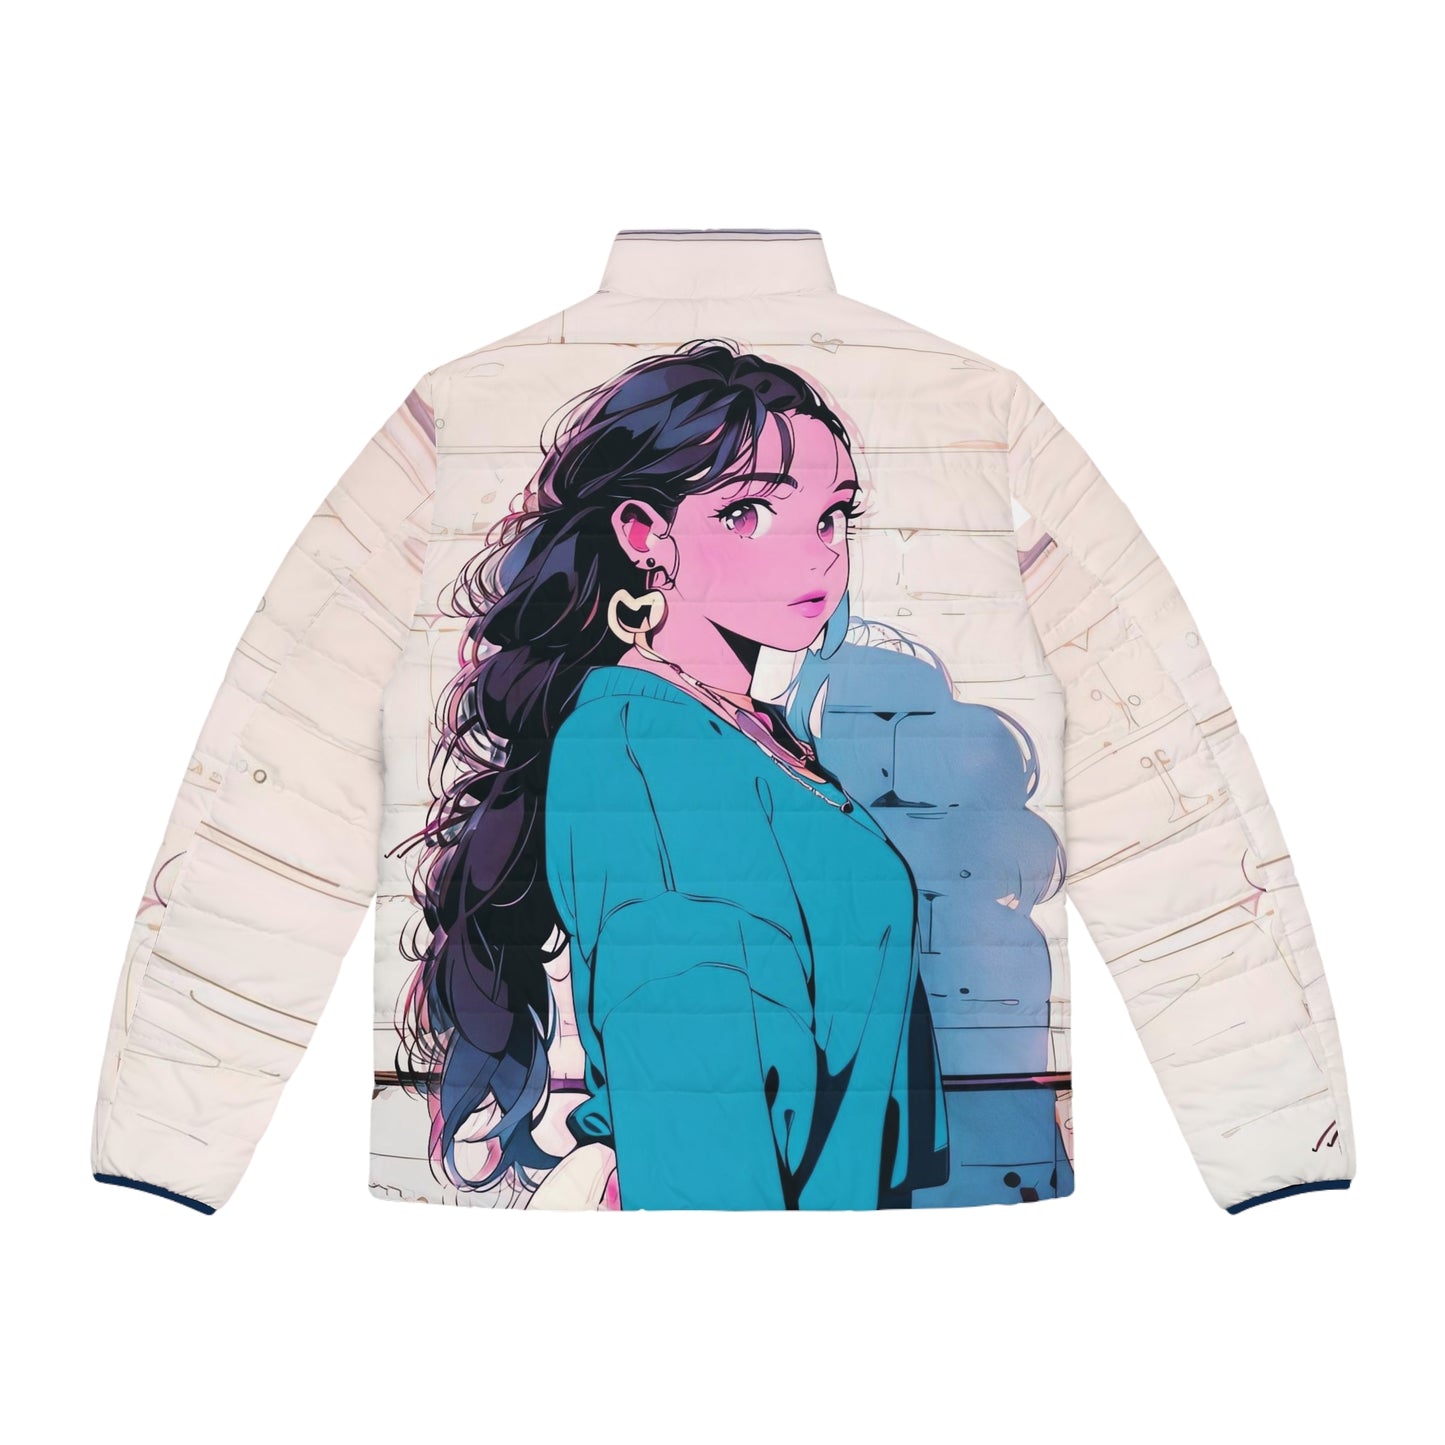 Anime Style Art Men's Puffer Jacket (AOP)- "In the 90s"